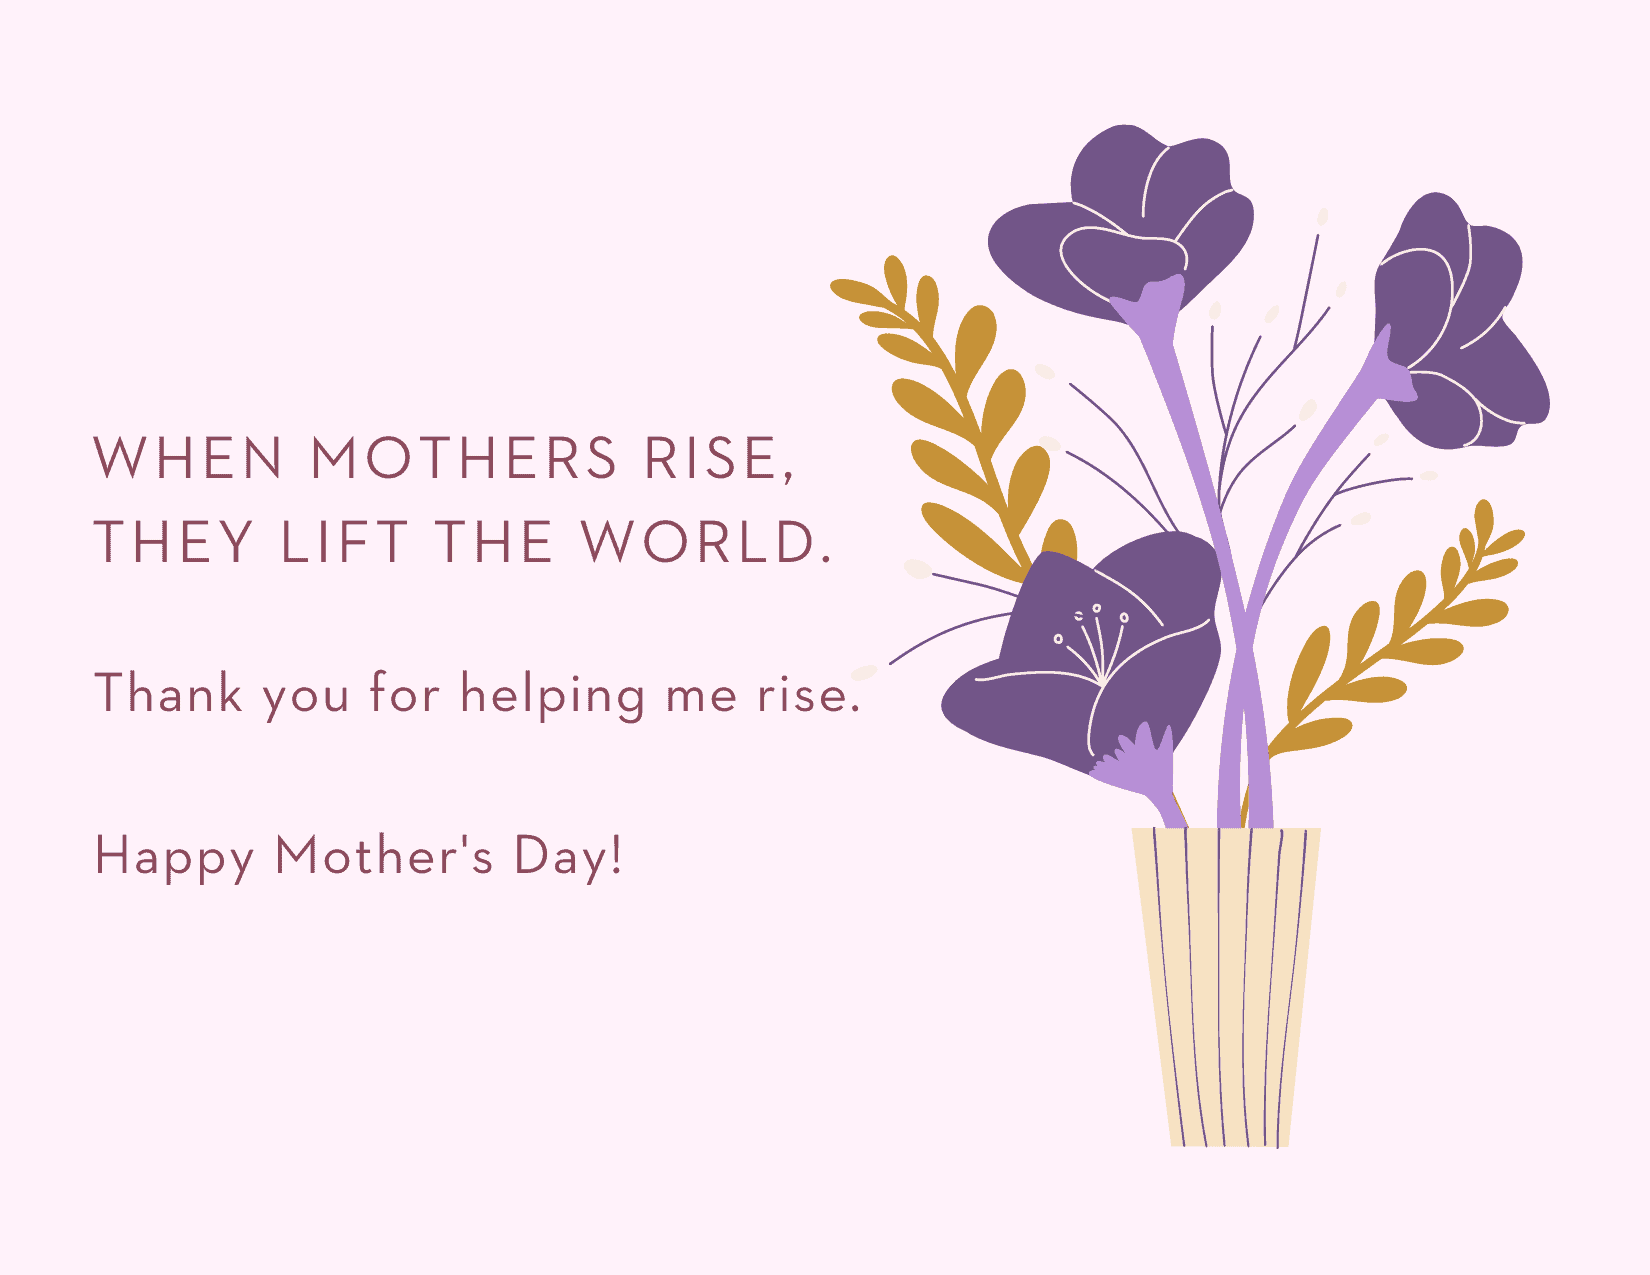 Tribute E-card design shows flowers and Mother's Day message